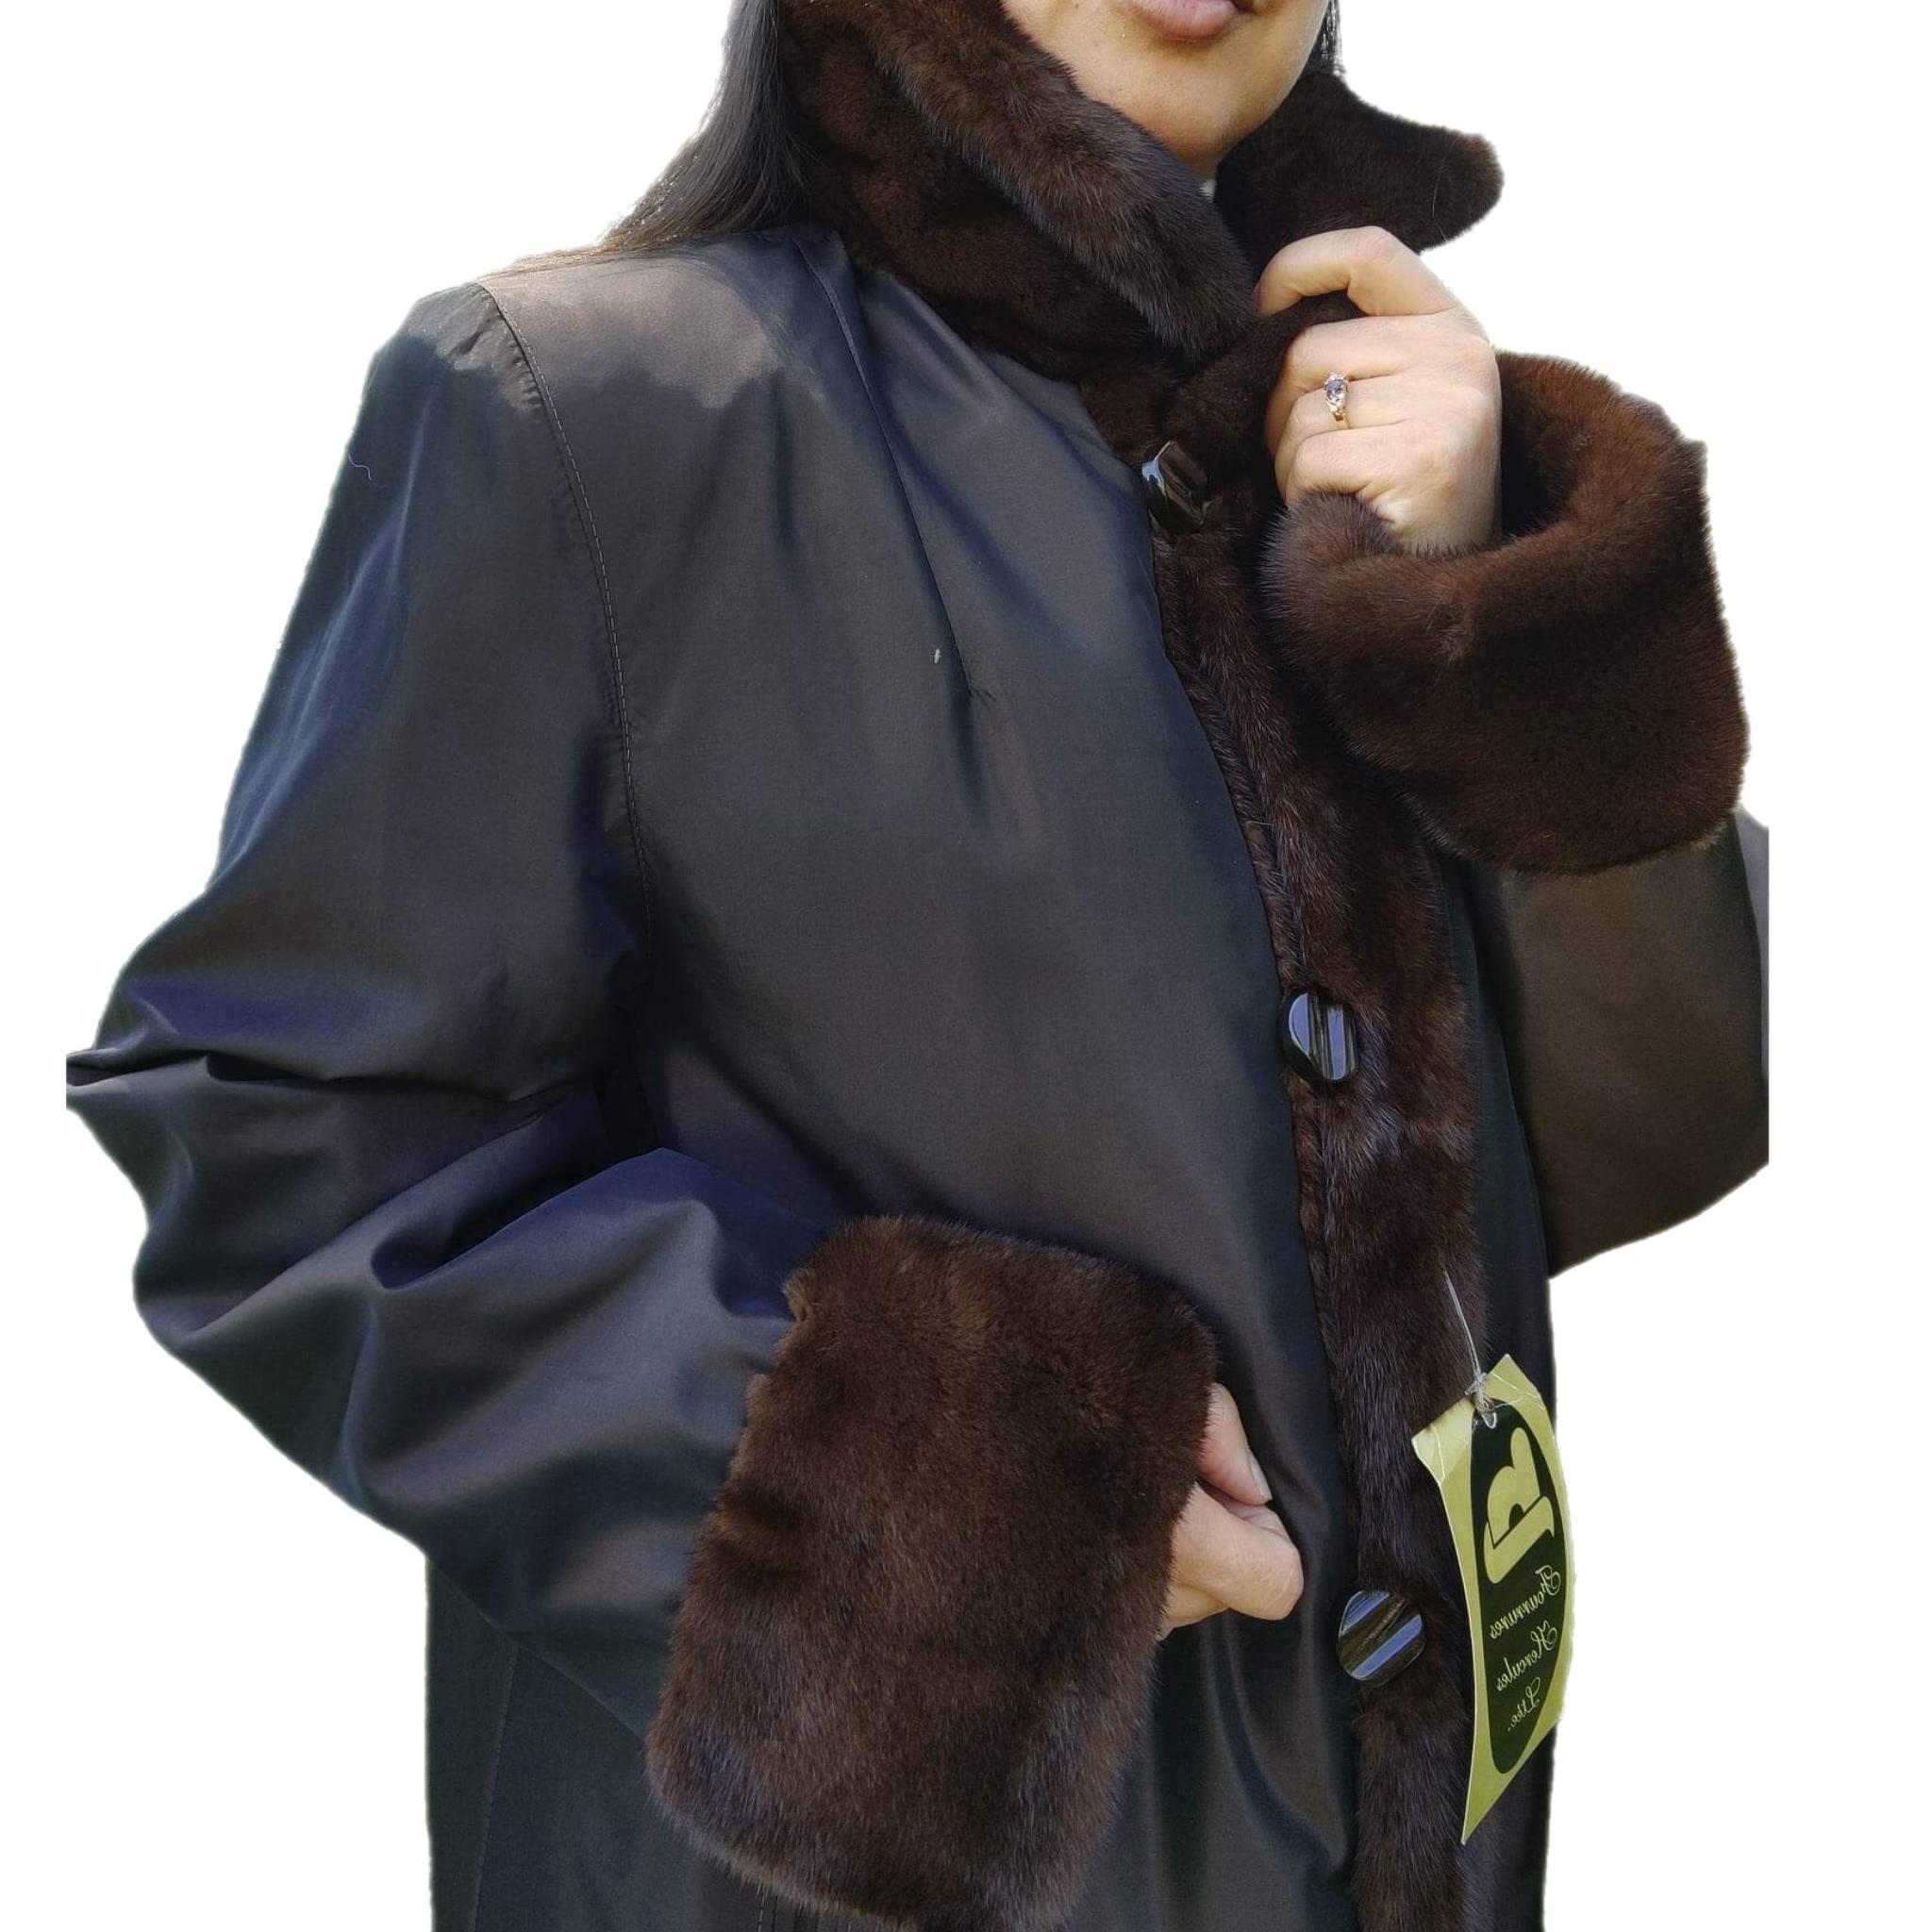 PRODUCT DESCRIPTION:

Brand New sheared Mink Fur Coat reversible size 10 (M)

Condition: Brand New

Closure: Buttons

Color: demi buff

Material: sheared Mink fur

Garment type: Coat

Sleeves: folded double fur cuffs

Pockets: two pockets

Collar: